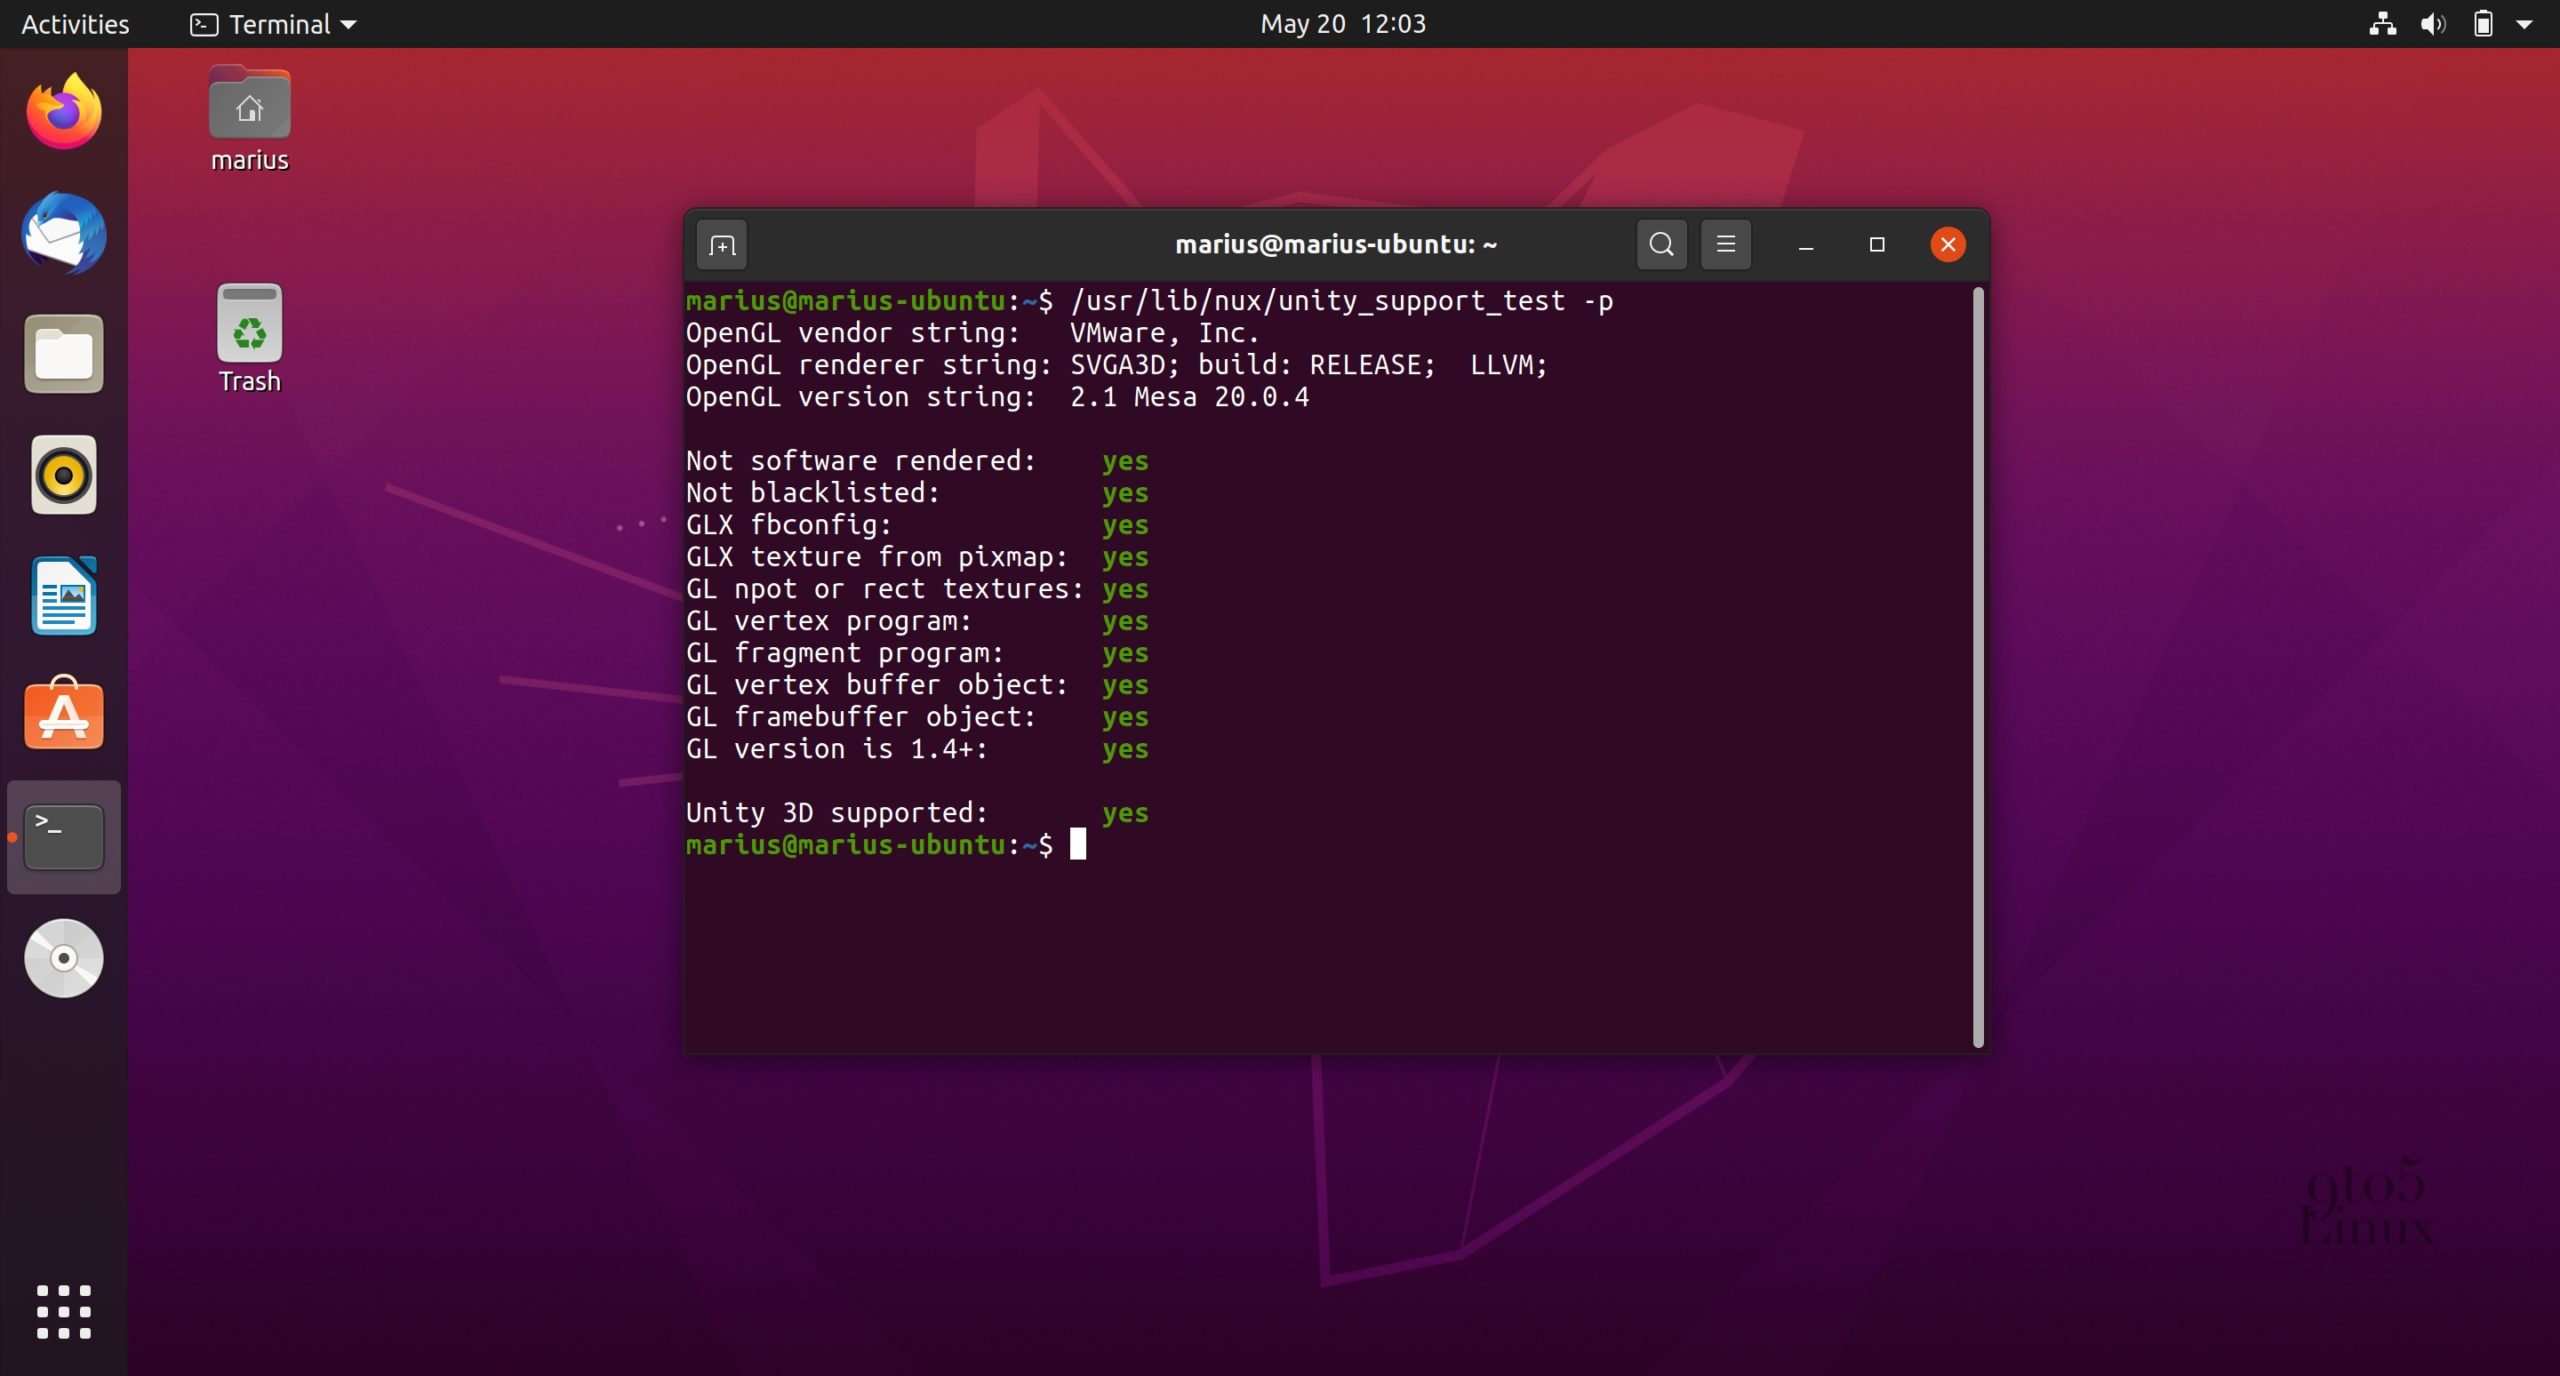 How to Make Ubuntu 20.04 LTS VMs Smoother by Enabling 3D Acceleration on VirtualBox